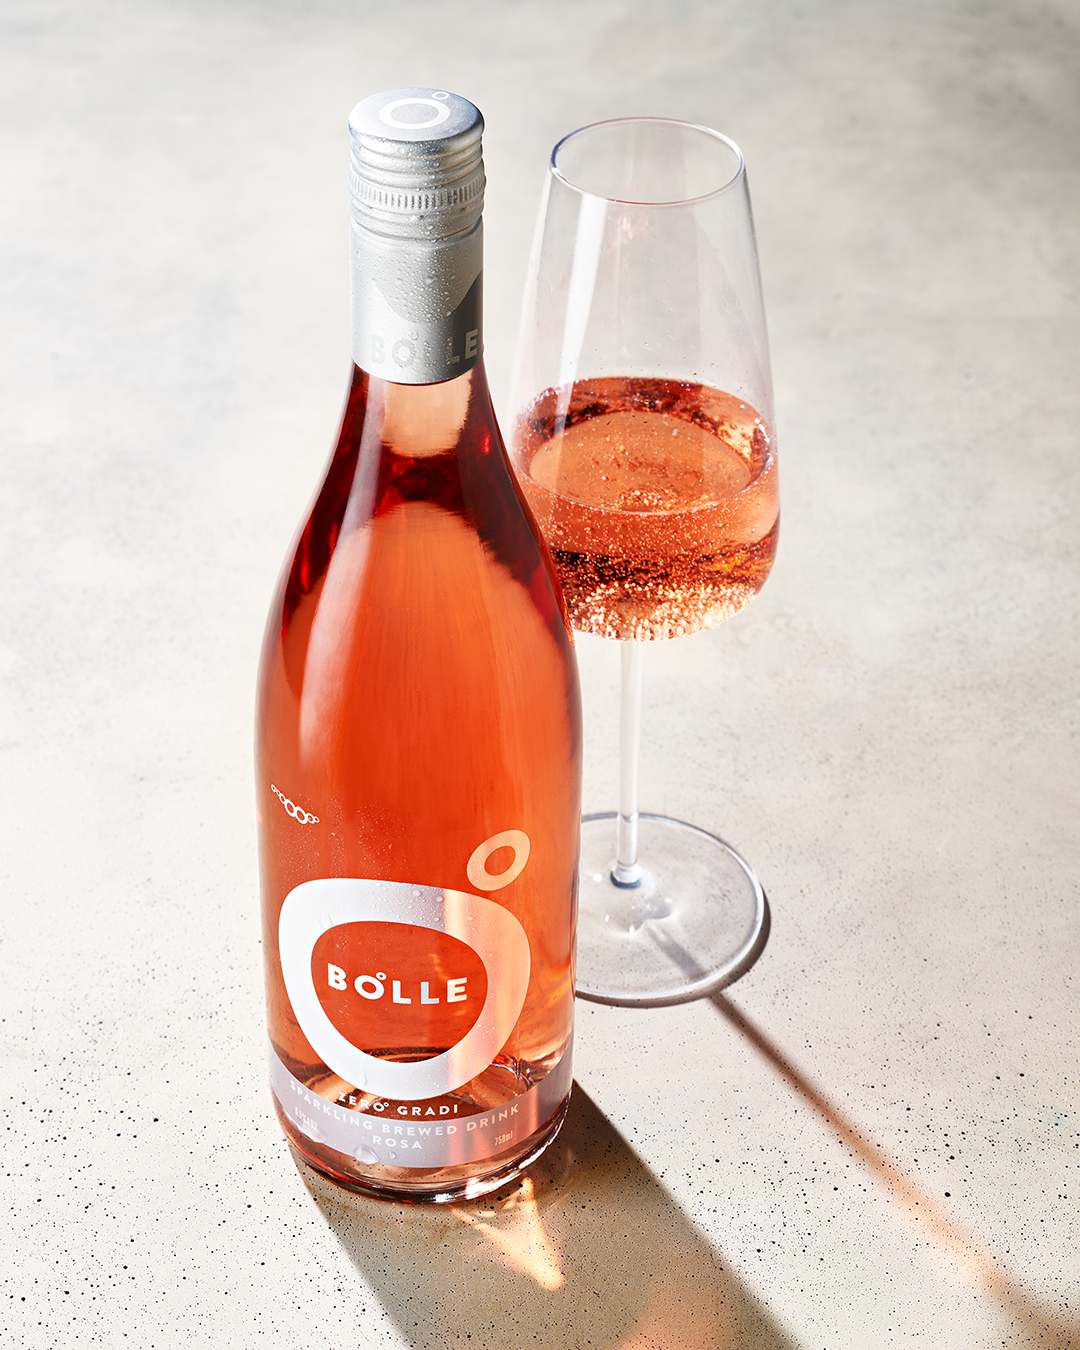 Bolle+Rosa+bottle+and+glass_1080x1350.png